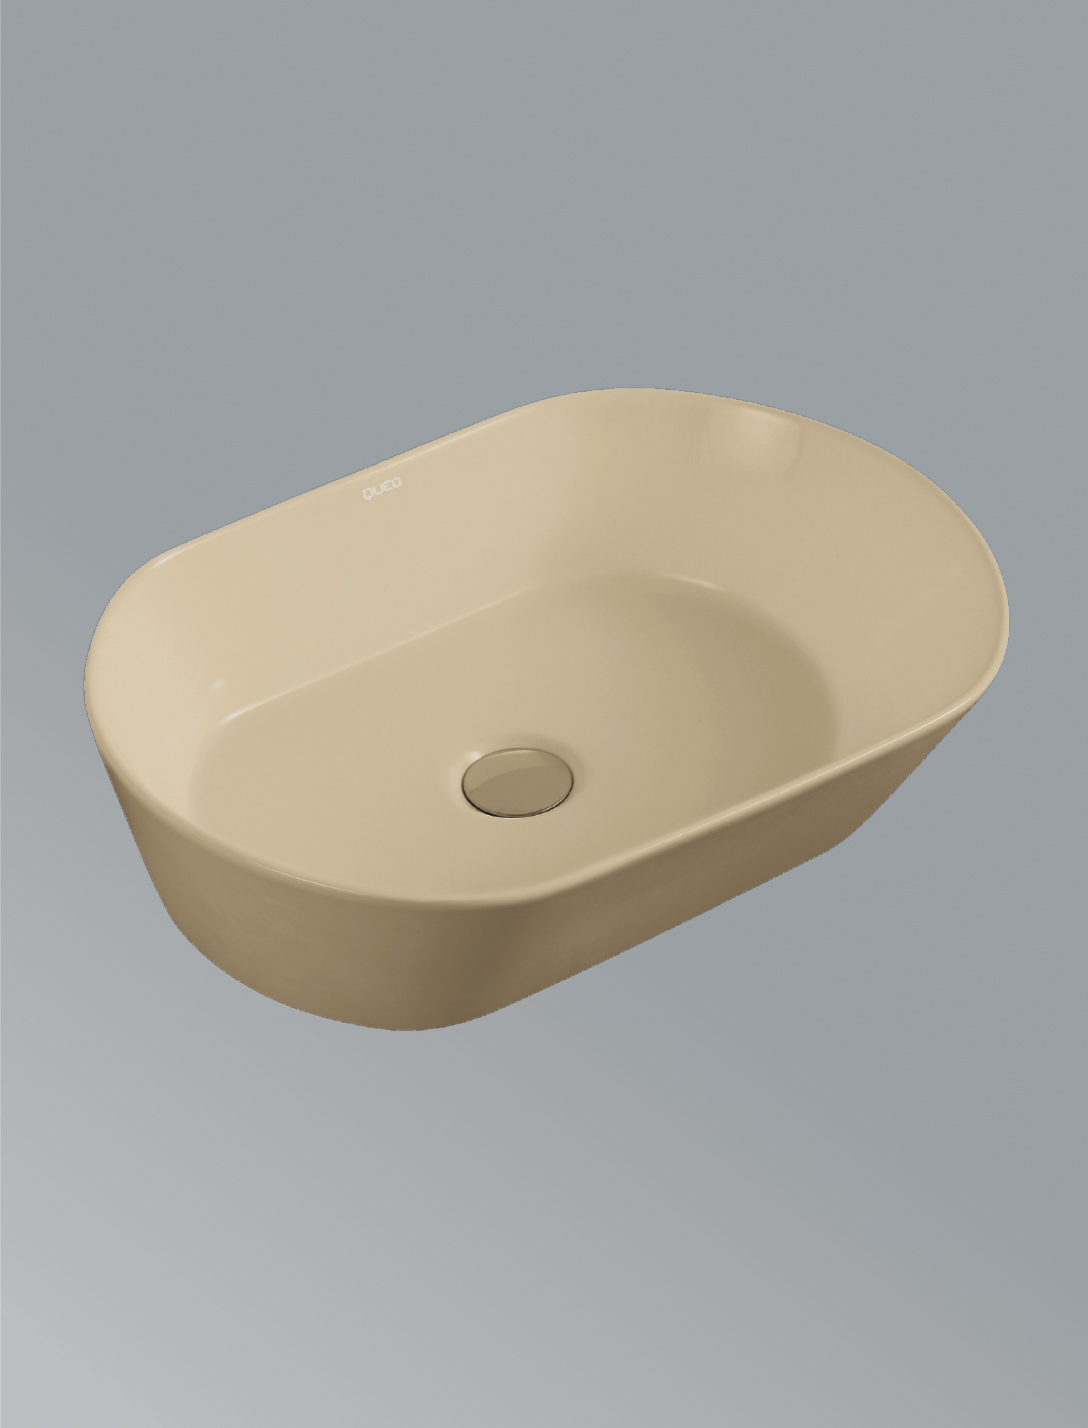 over-the-counter-basin-without-faucet-hole-in-matt-khaki